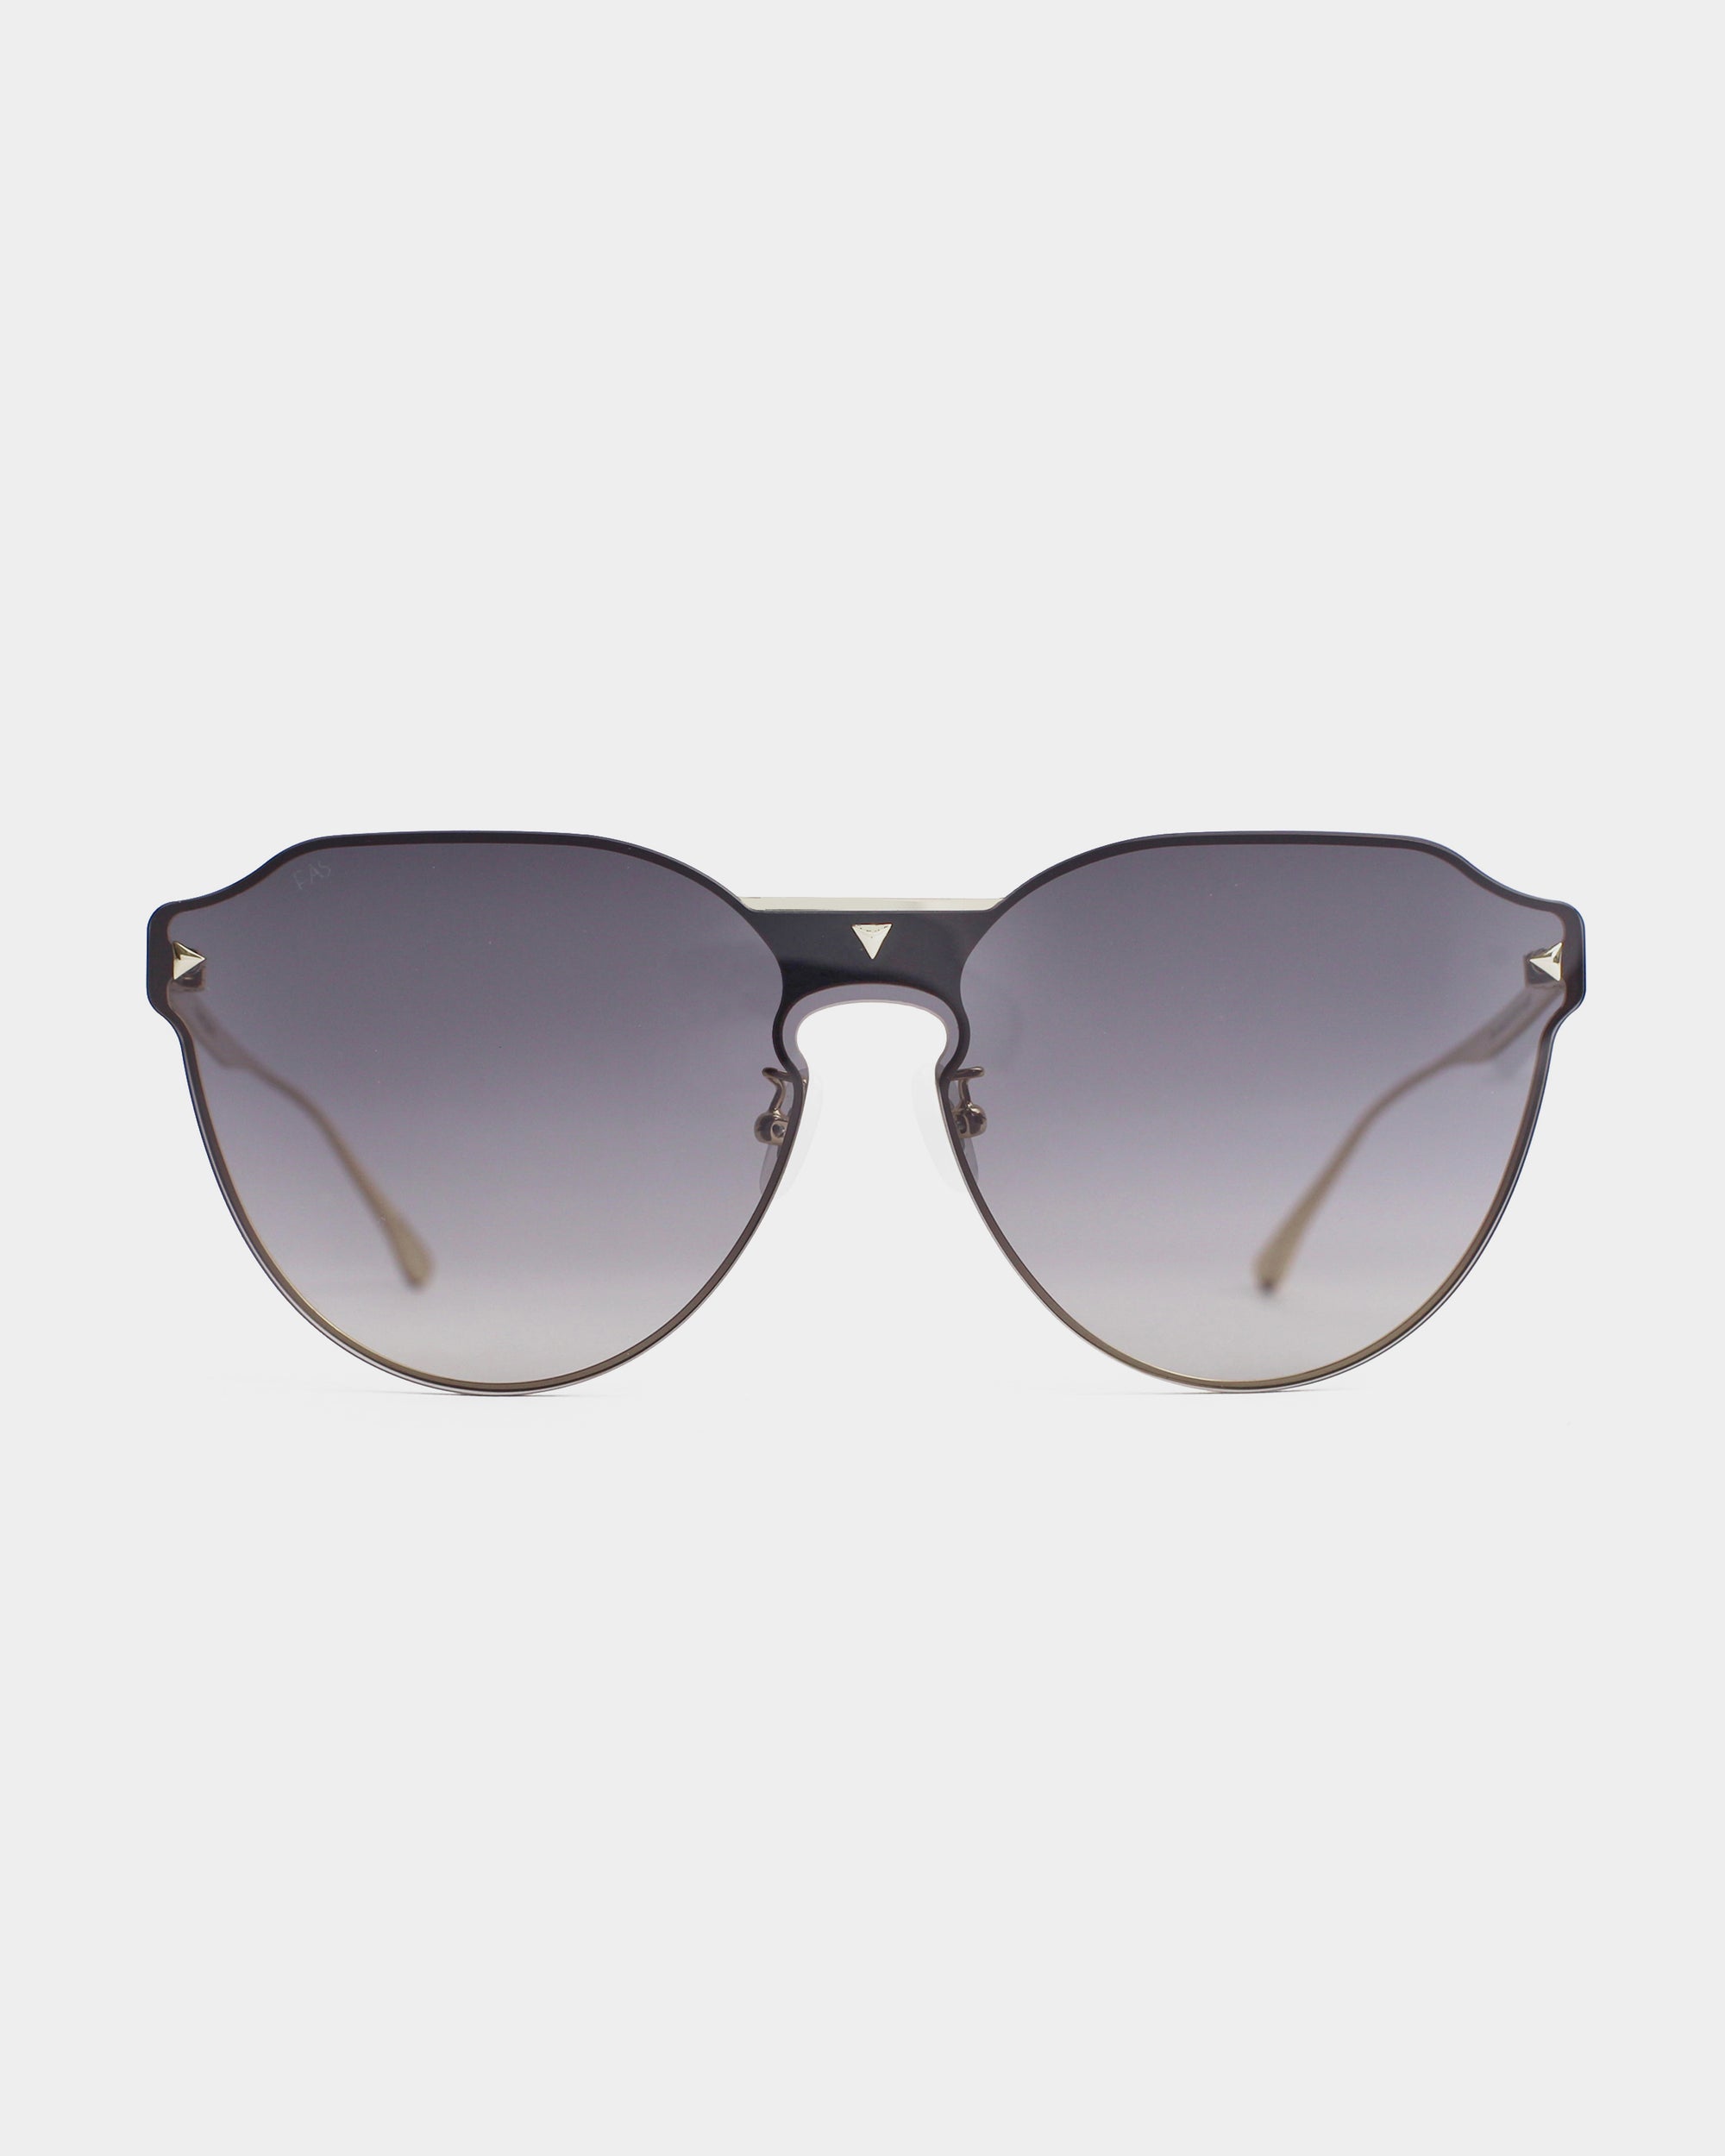 A pair of stylish For Art's Sake® Error 404 sunglasses with a black frame and gradient gray-tinted nylon lenses, offering UV protection. The design includes small metallic triangular details on the upper corners of the lenses. The sunglasses have thin, light brown arms with elegant 18-karat gold plating. The background is plain white.